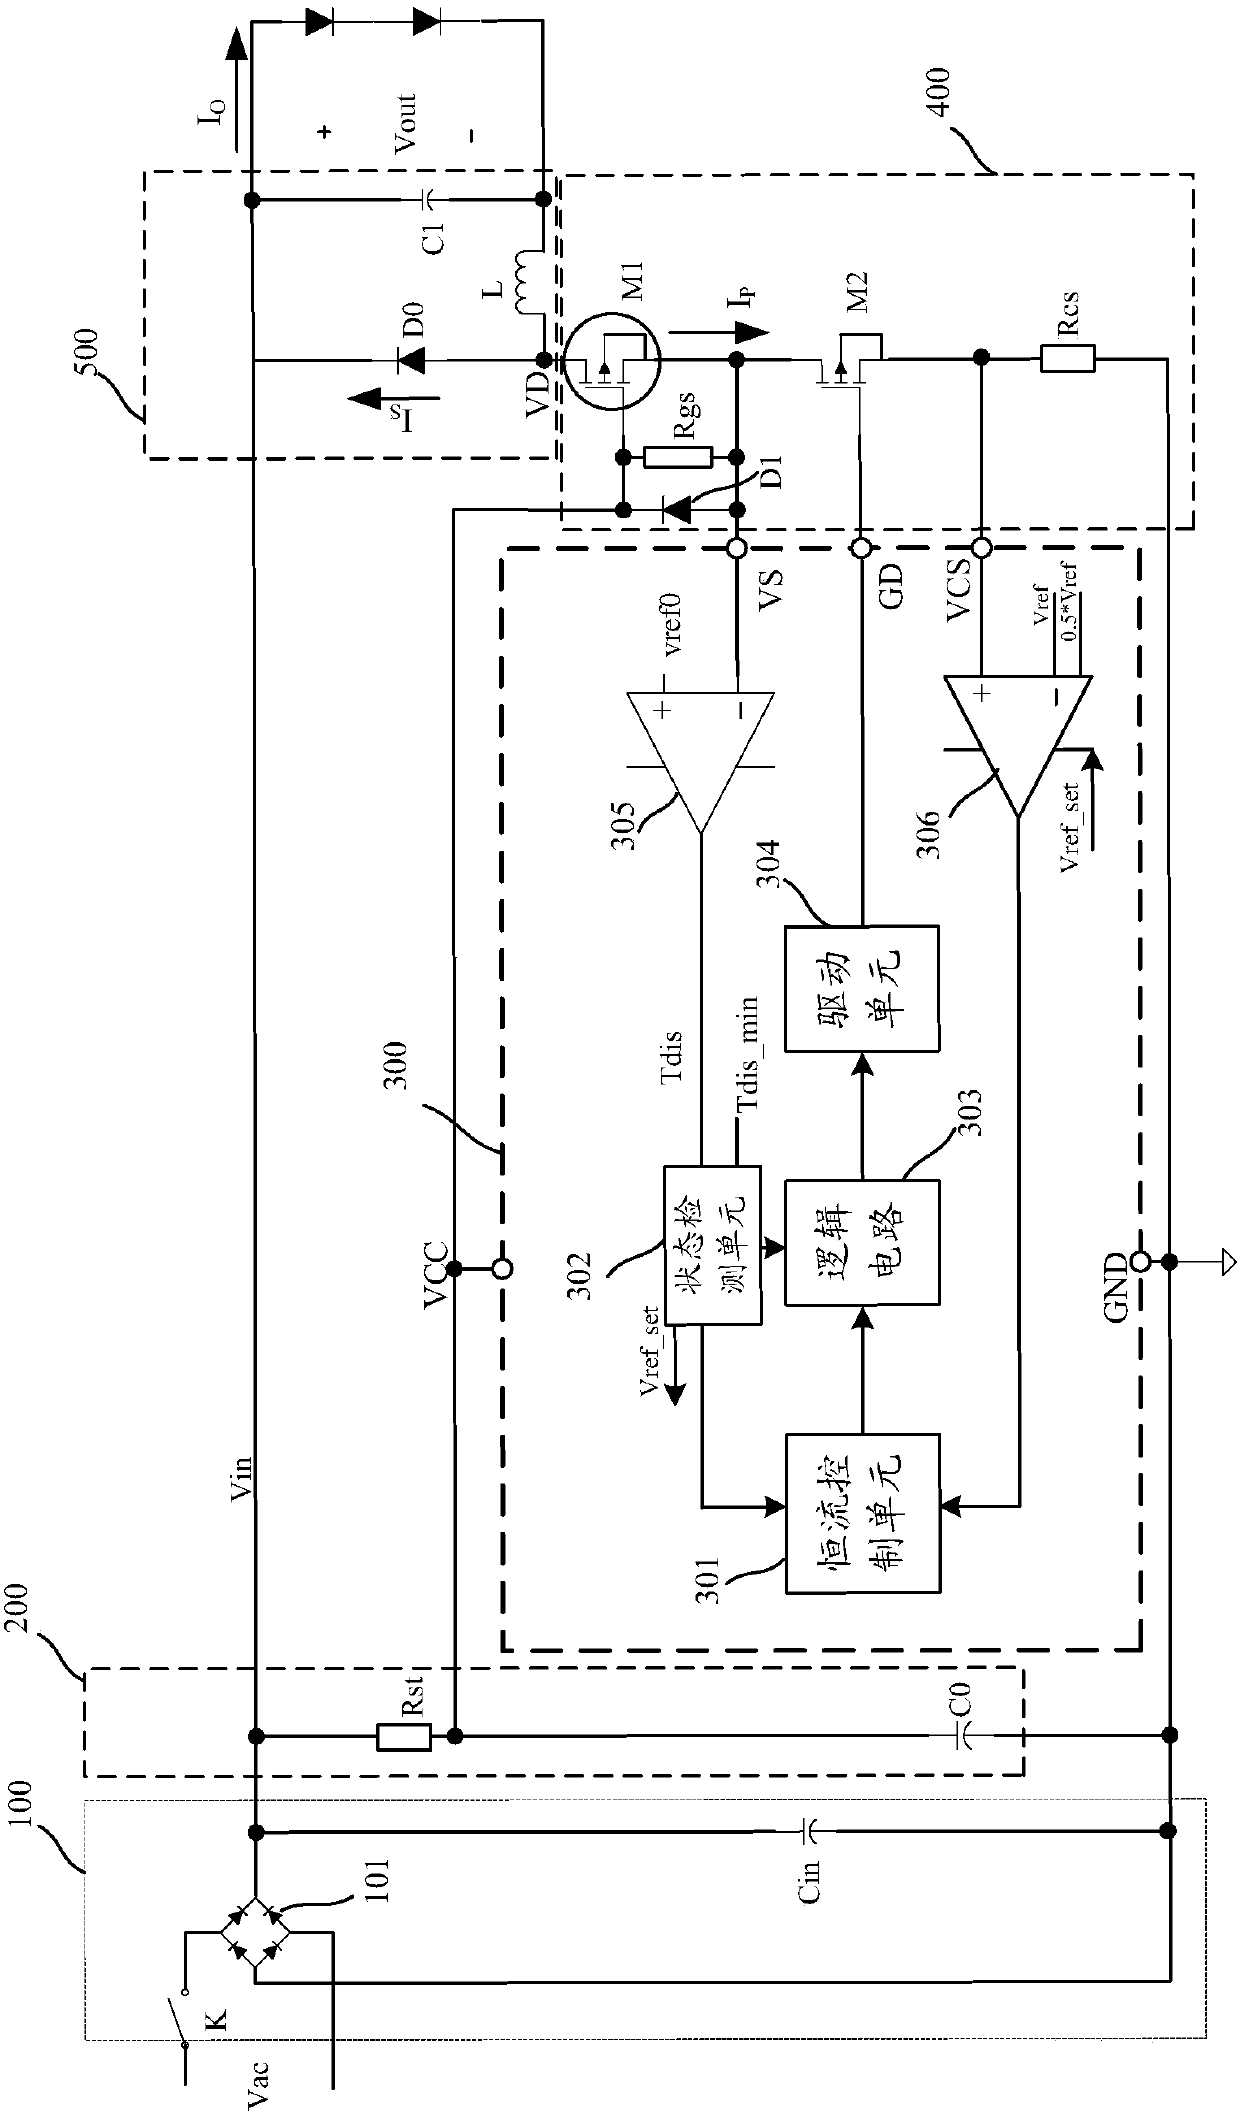 An Anti-interference Constant Current LED Driving Circuit